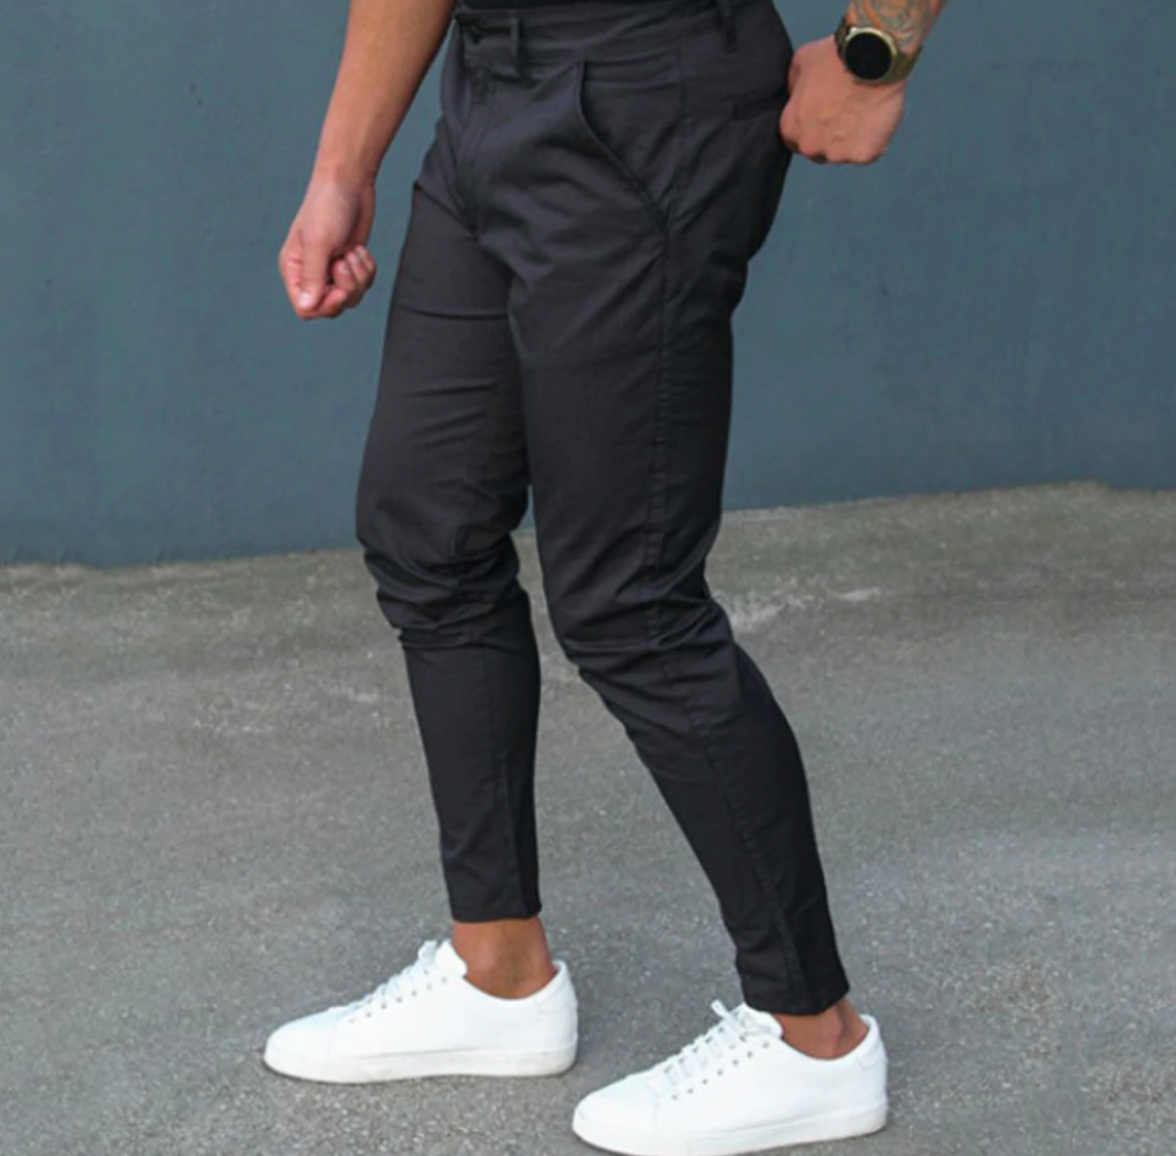 FIORE - Stylish and unique pants